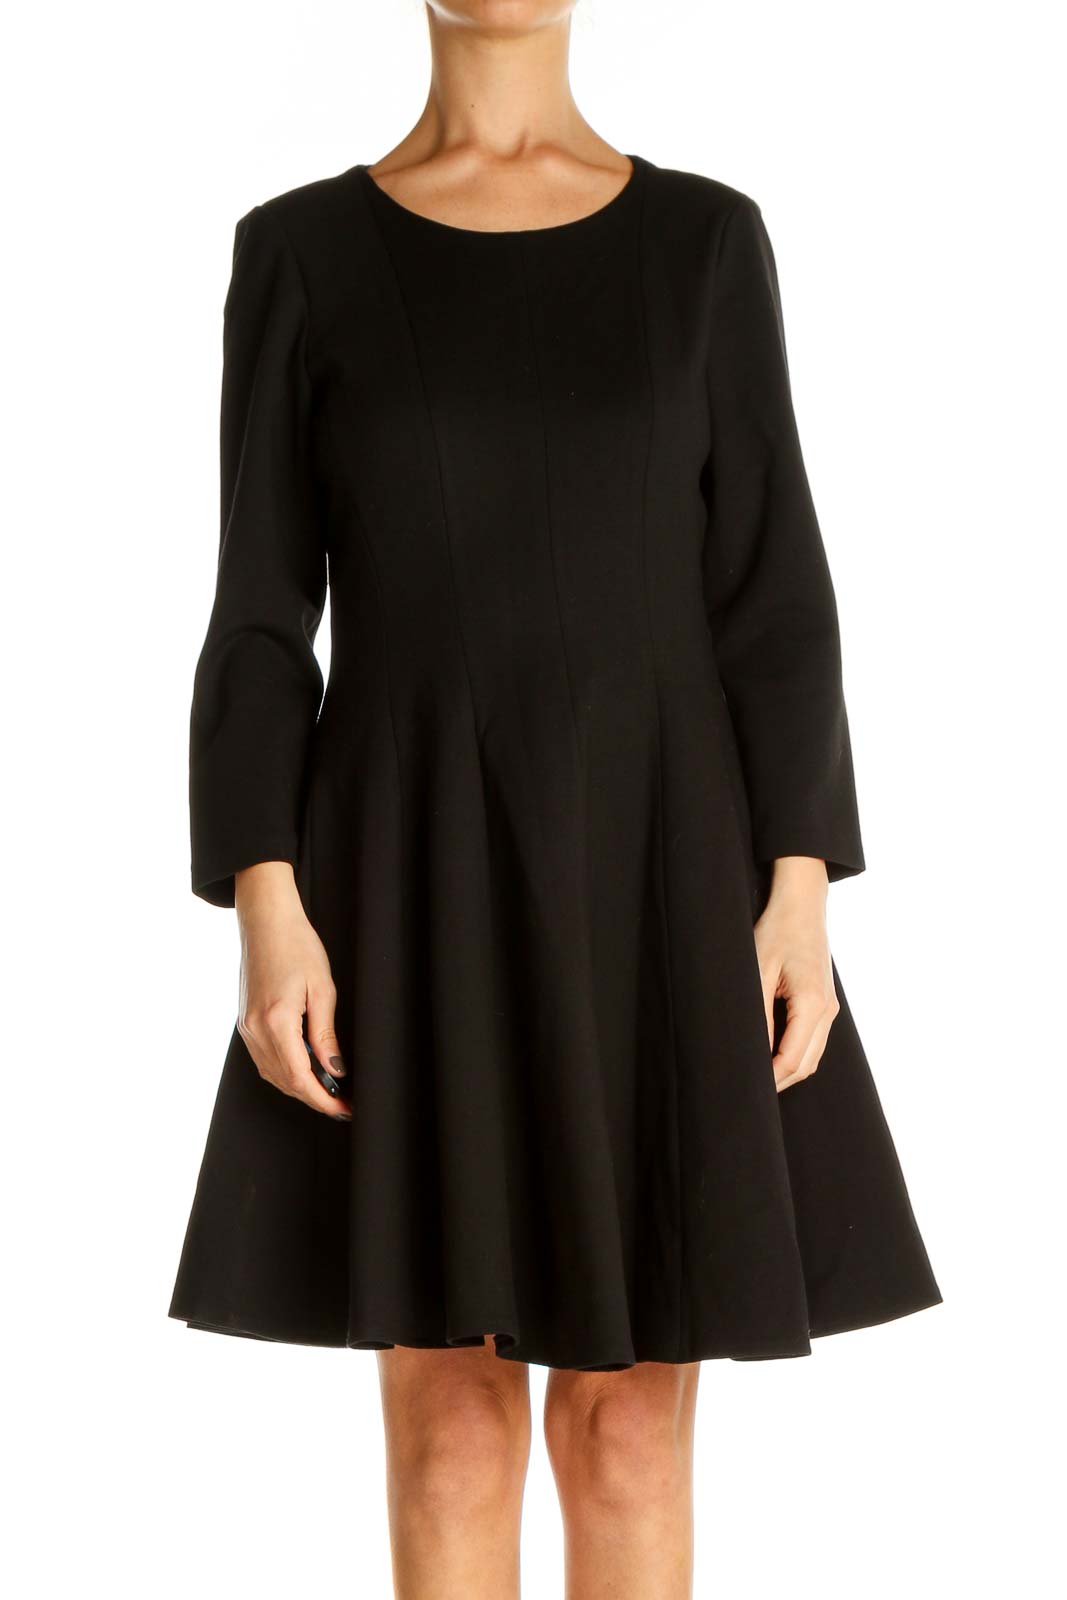 Black Solid Classic Fit & Flare Dress Front